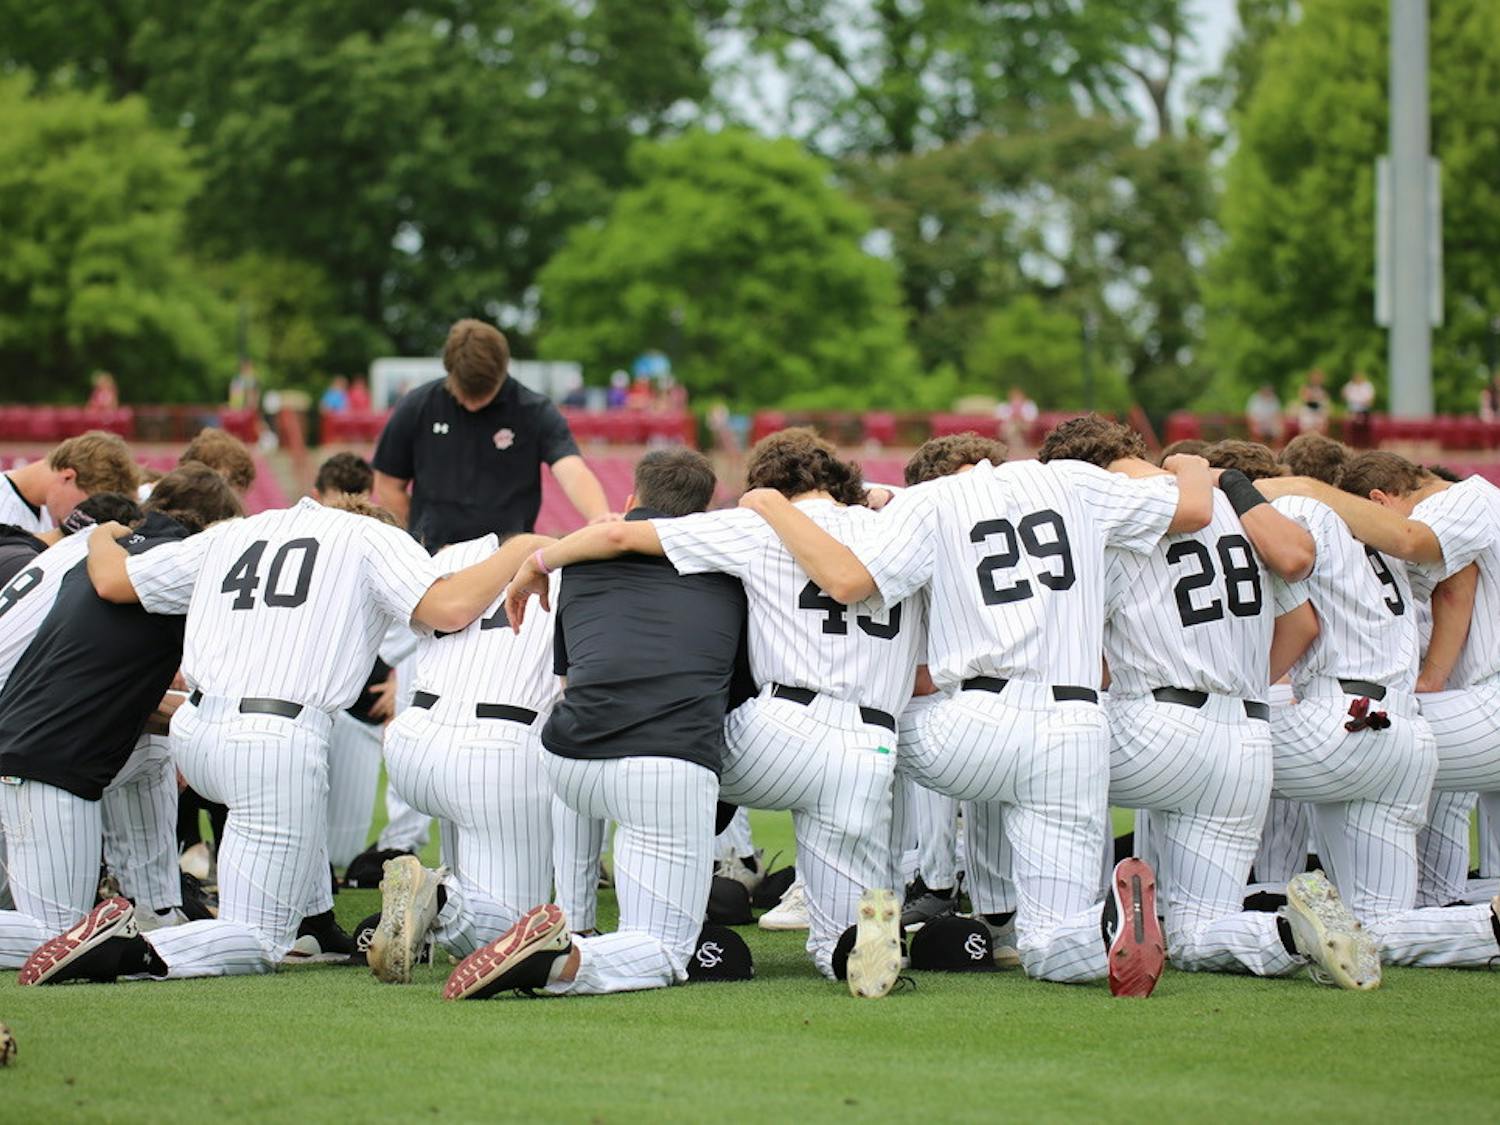 The South Carolina Gamecocks huddle together in prayer before the second game of an SEC series against LSU on April 7, 2023. The Gamecocks defeated the Tigers 13-5 in the first game of the series but dropped game two 8-7.&nbsp;